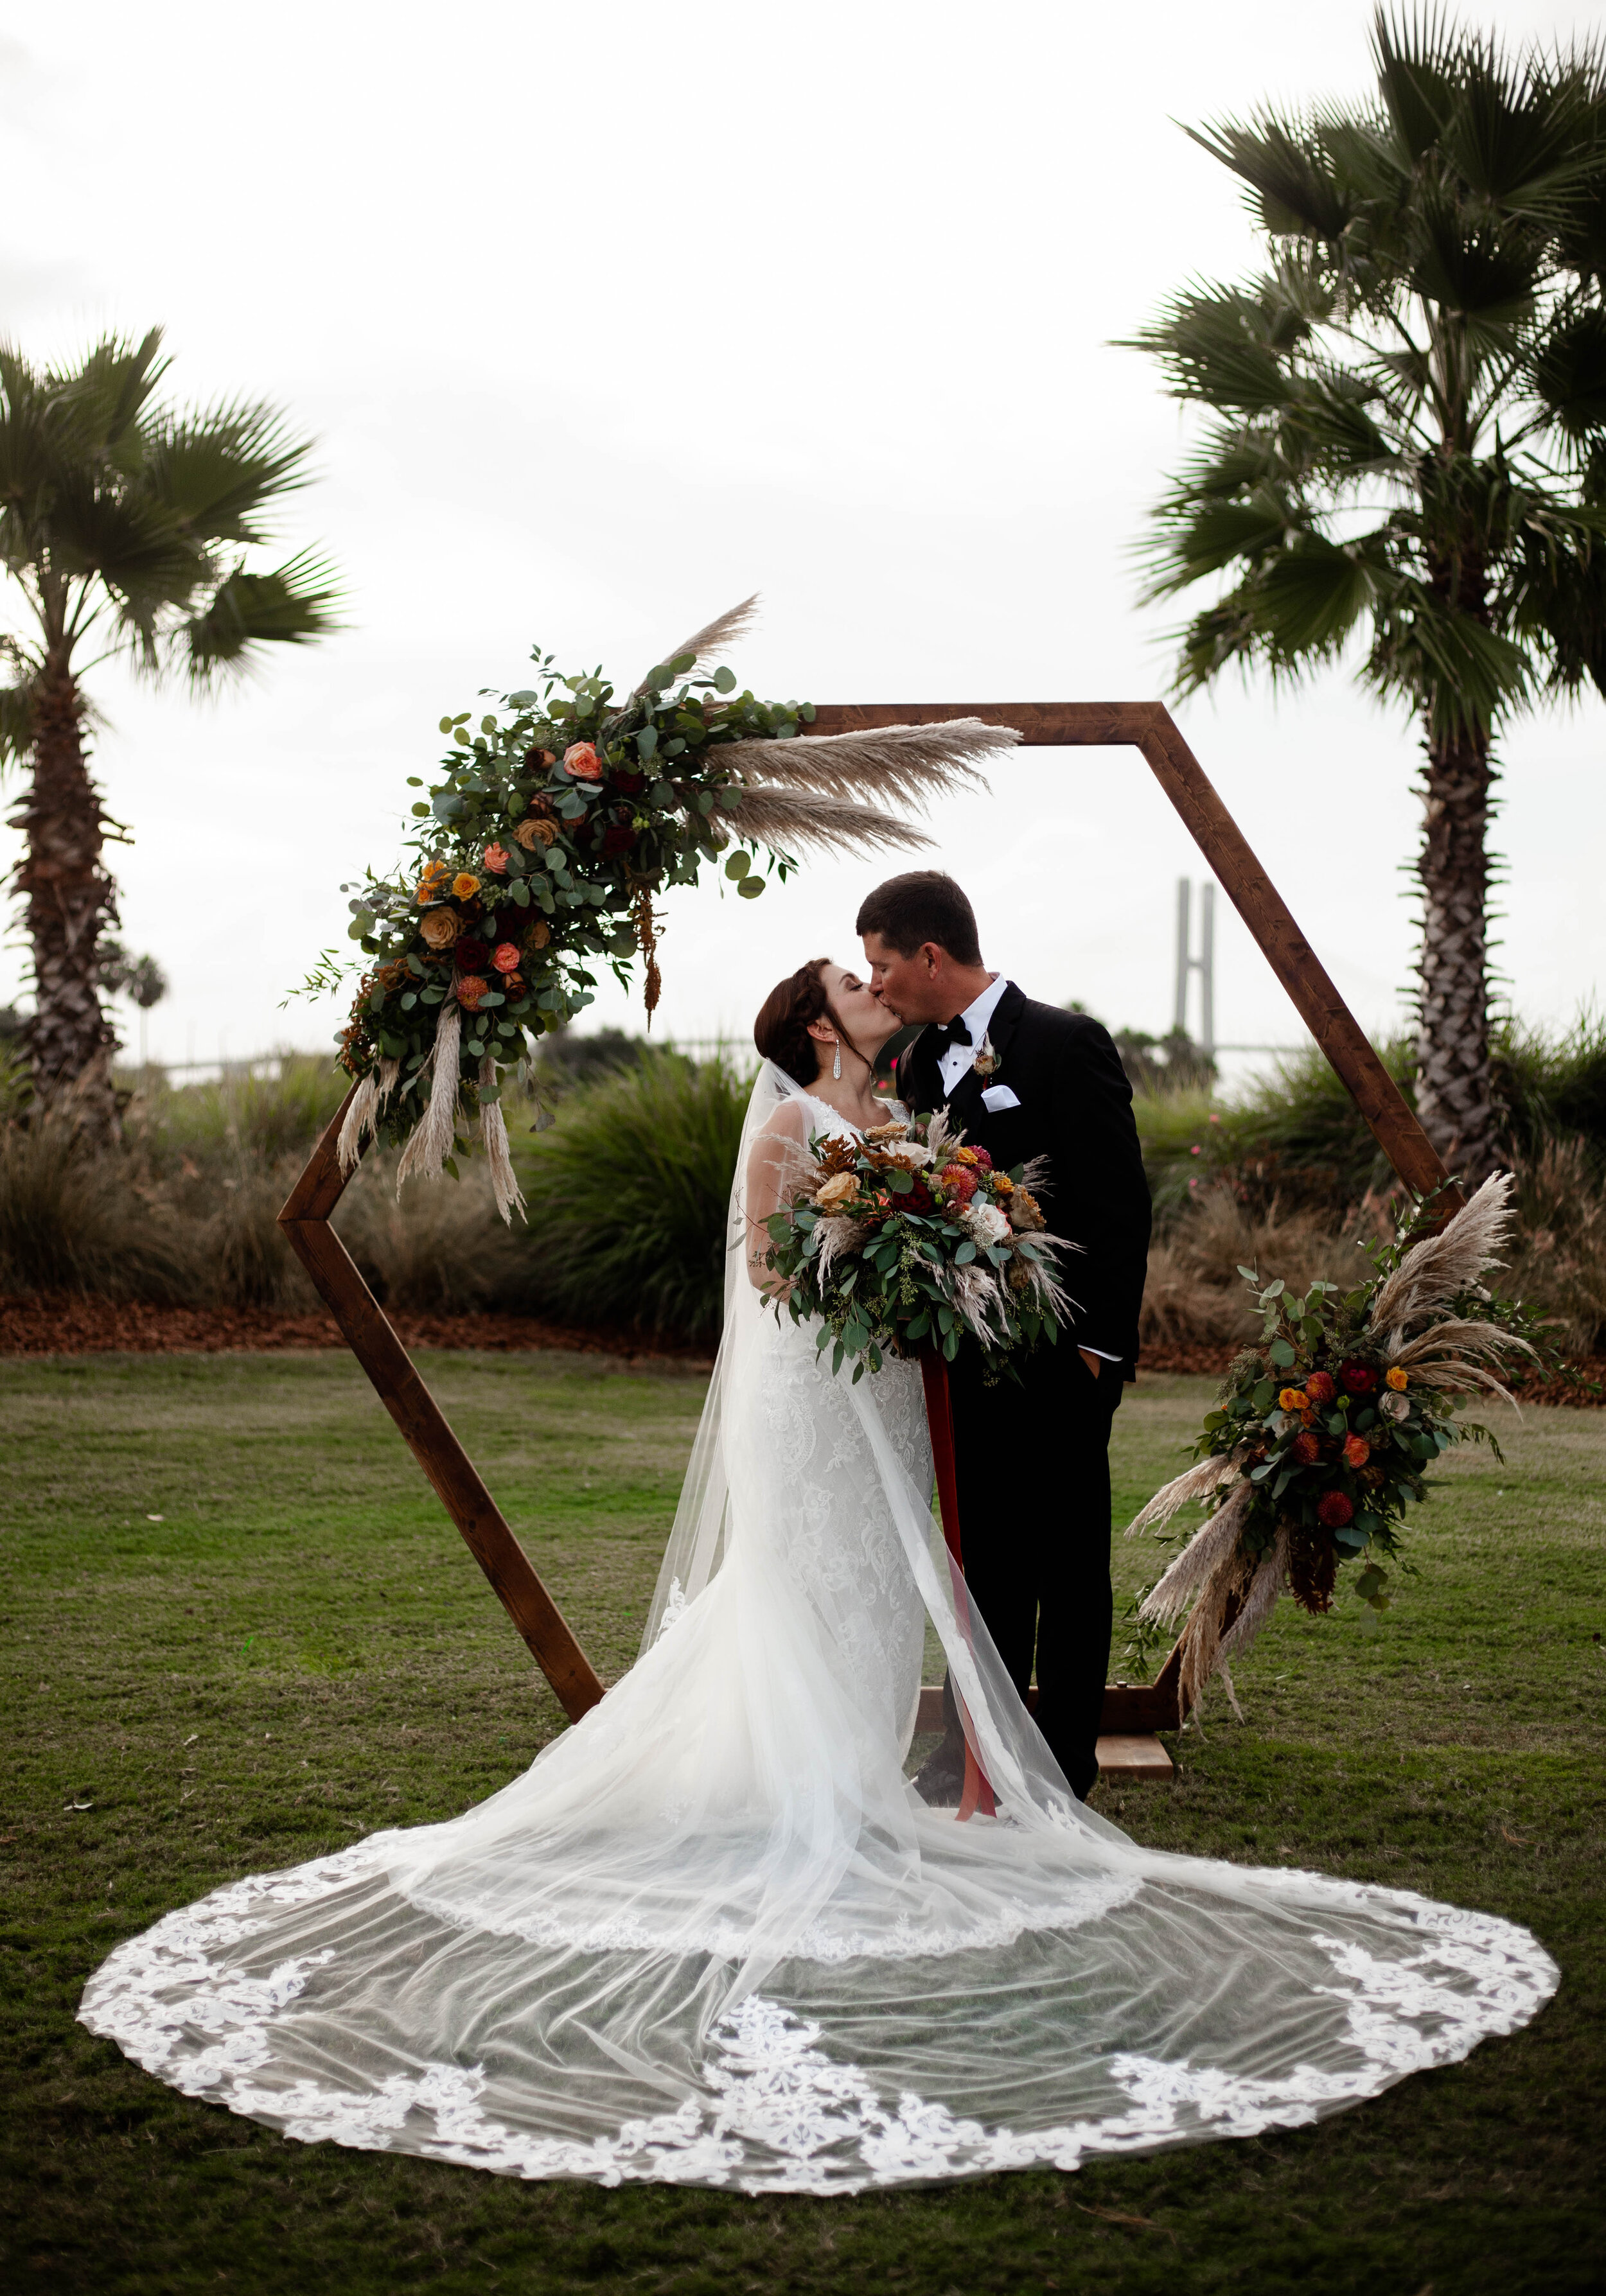 ivory-and-beau-wedding-and-florals-lydia-and-tyler-savannah-wedding-flowers-florals-savannah-florist-wedding-coordinator-georgia-florist-wedding-florist-wedding-inspo-inspiration-wedding-blog_MG_5199.jpg